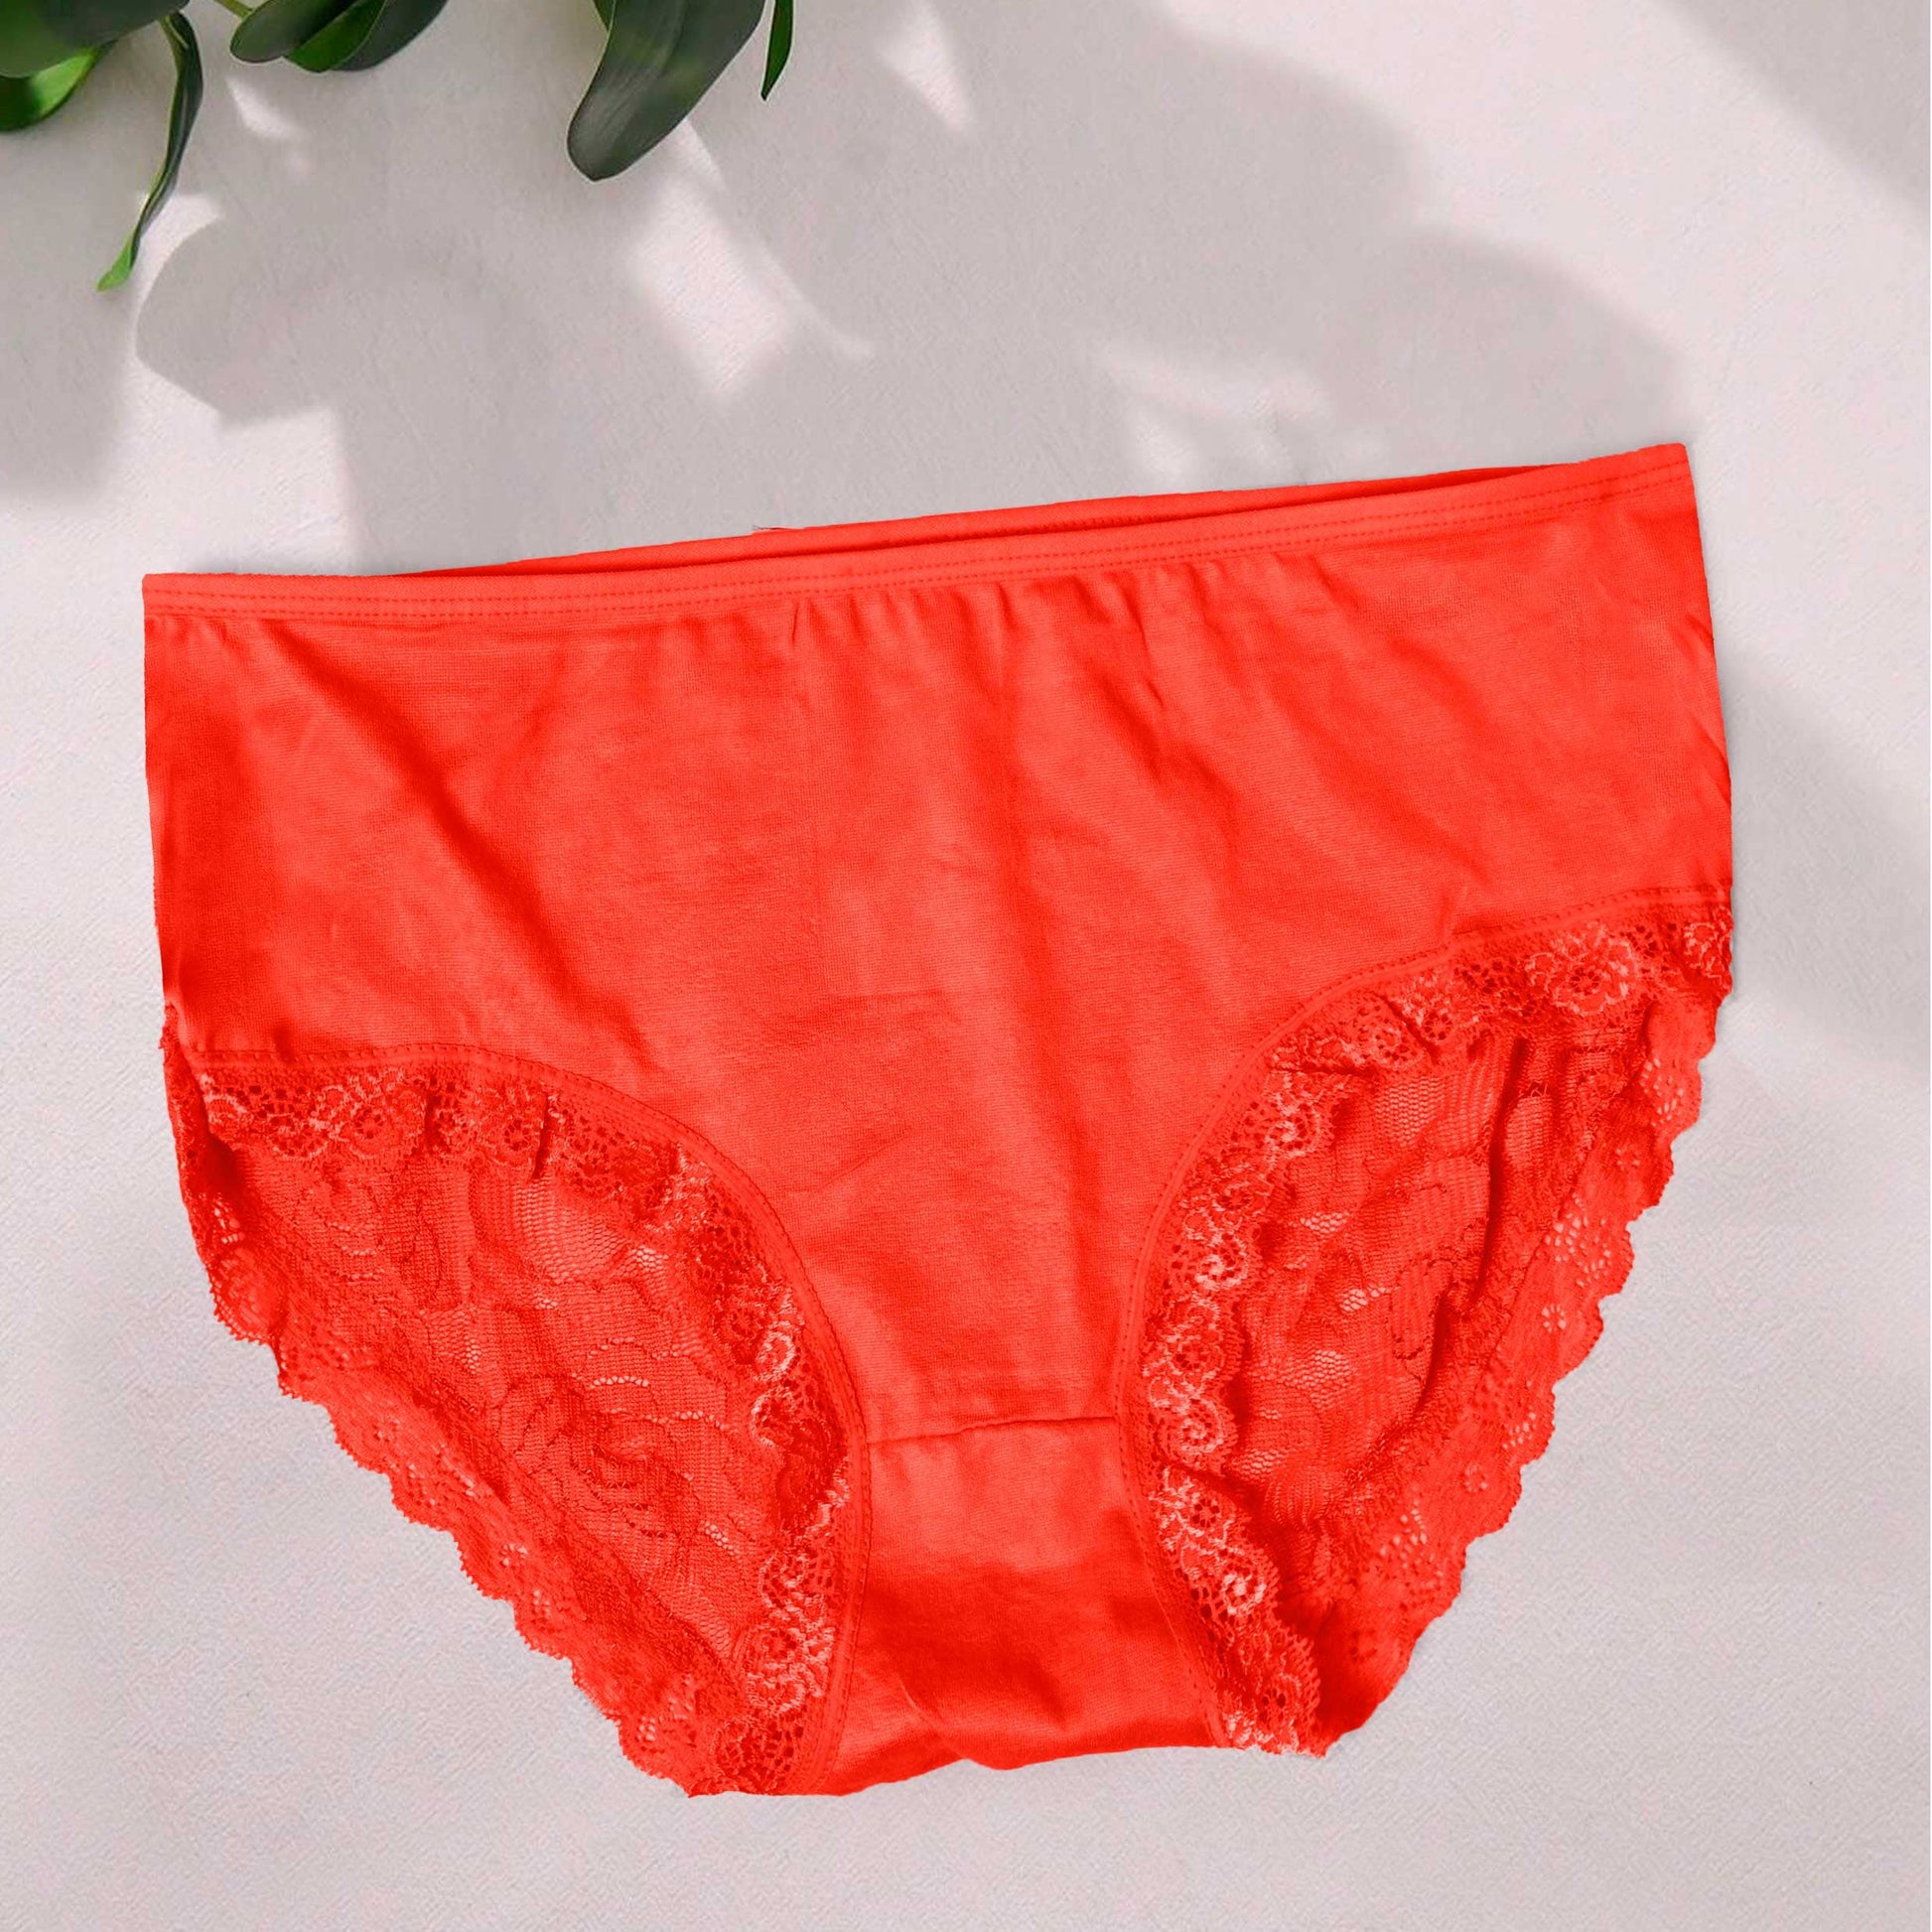 Women's Classic Floral Lace Design Hipster Panties Women's Lingerie SRL Red 32-34 